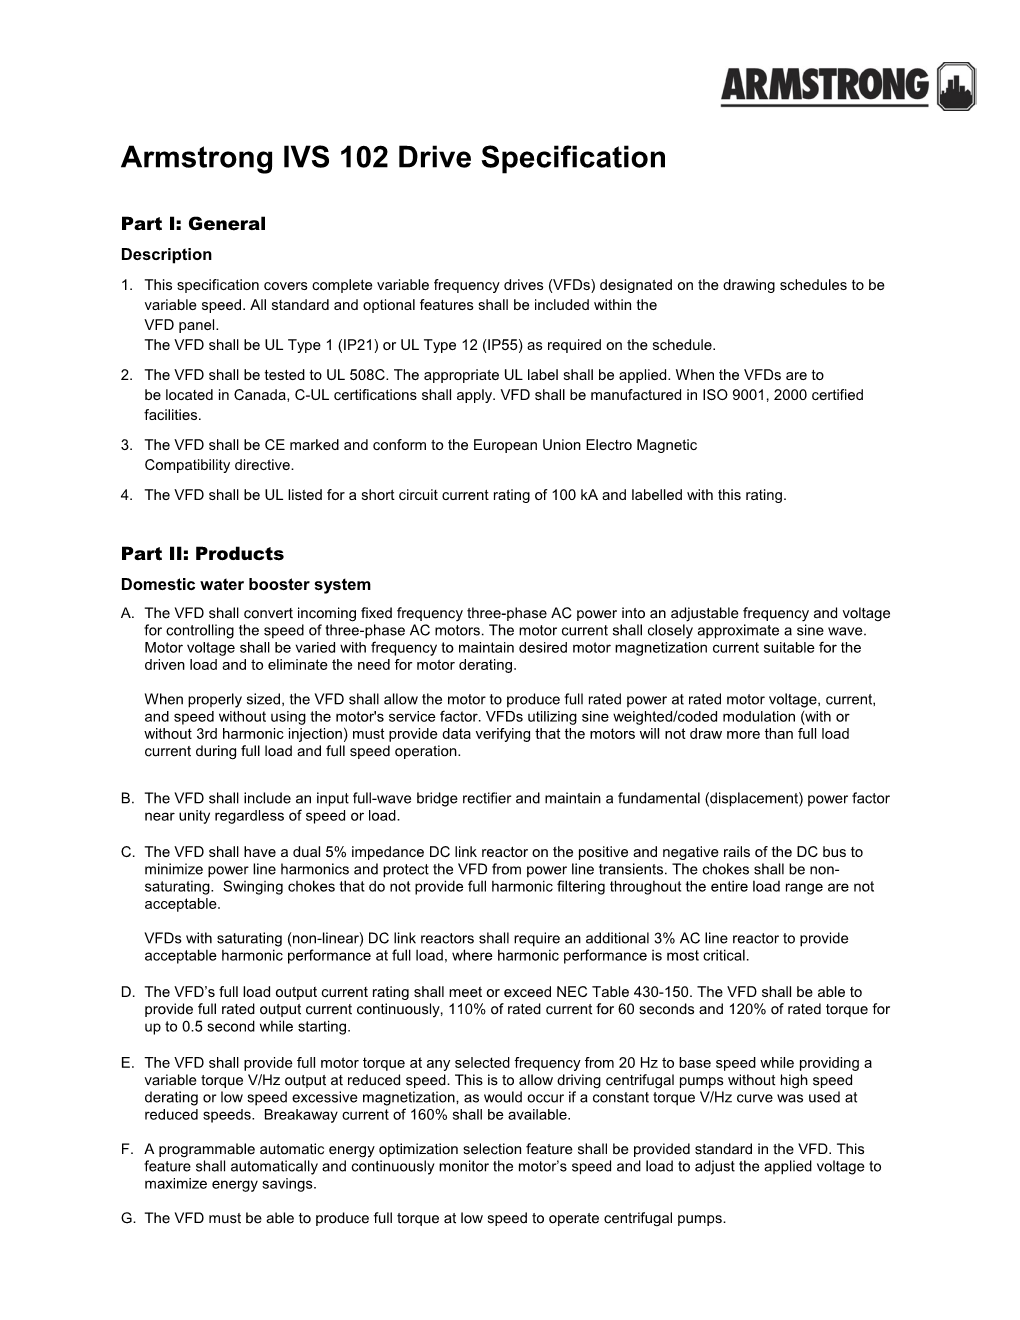 Armstrong IVS 102 Drive Specification